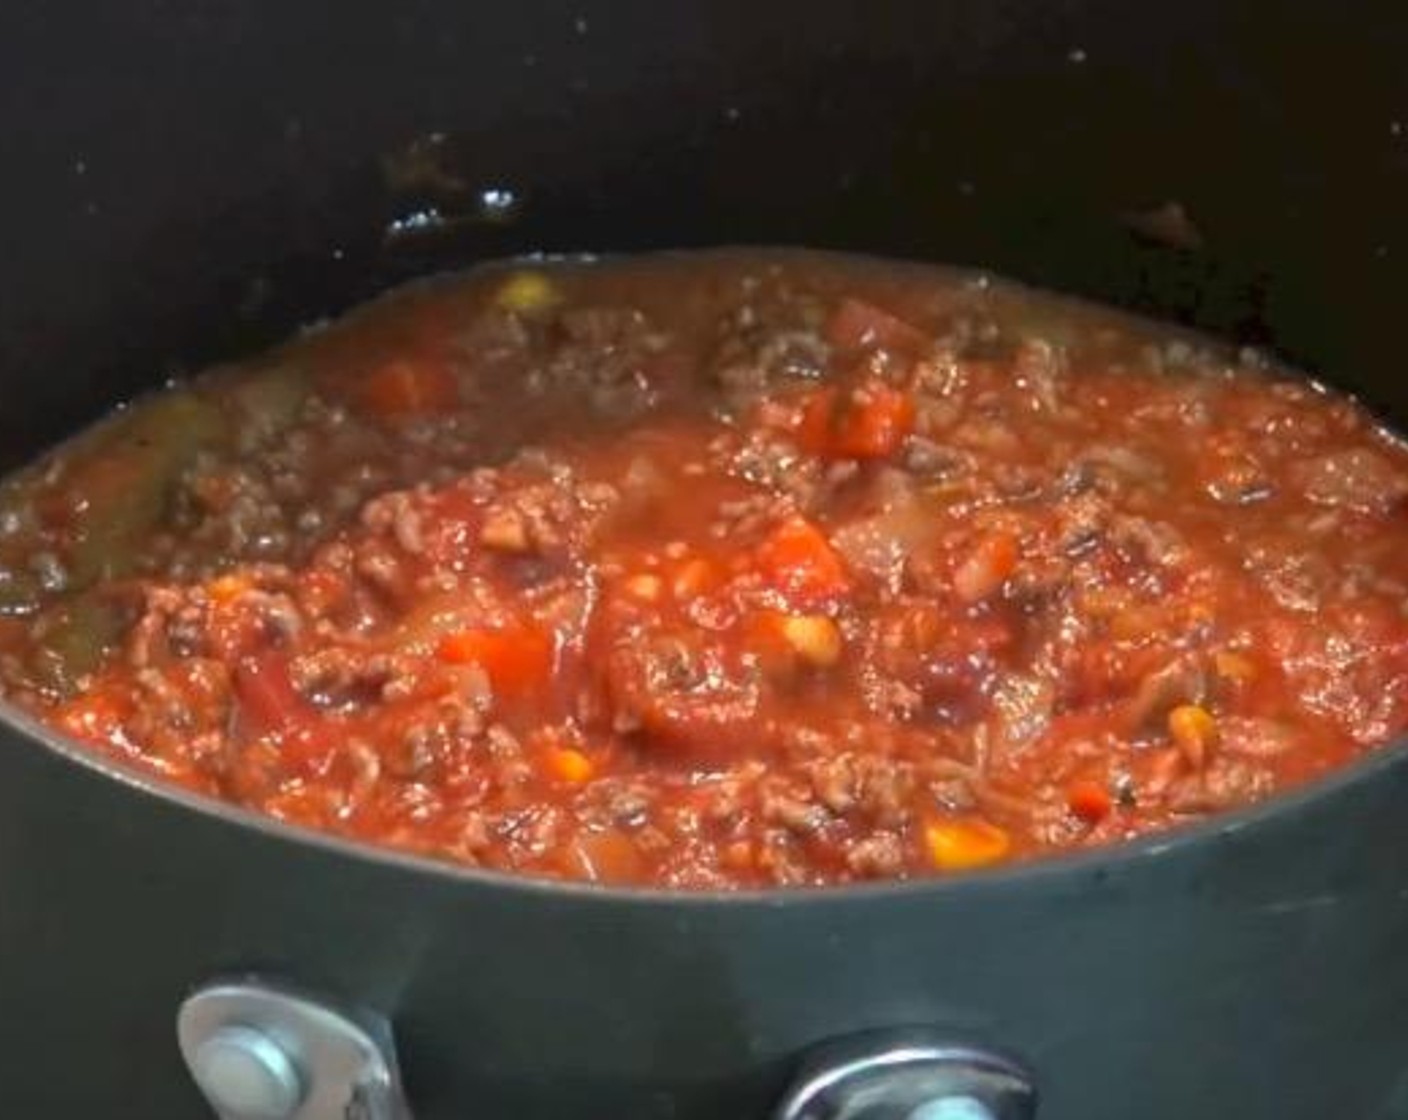 step 3 Add Worcestershire Sauce (1 Tbsp), Tomato Sauce (2 3/4 cups), Salt (to taste) and Ground Black Pepper (to taste). Stir together. Cover and reduce to a low temperature. Allow to simmer for 10 minutes, or until the sauce has thickened.